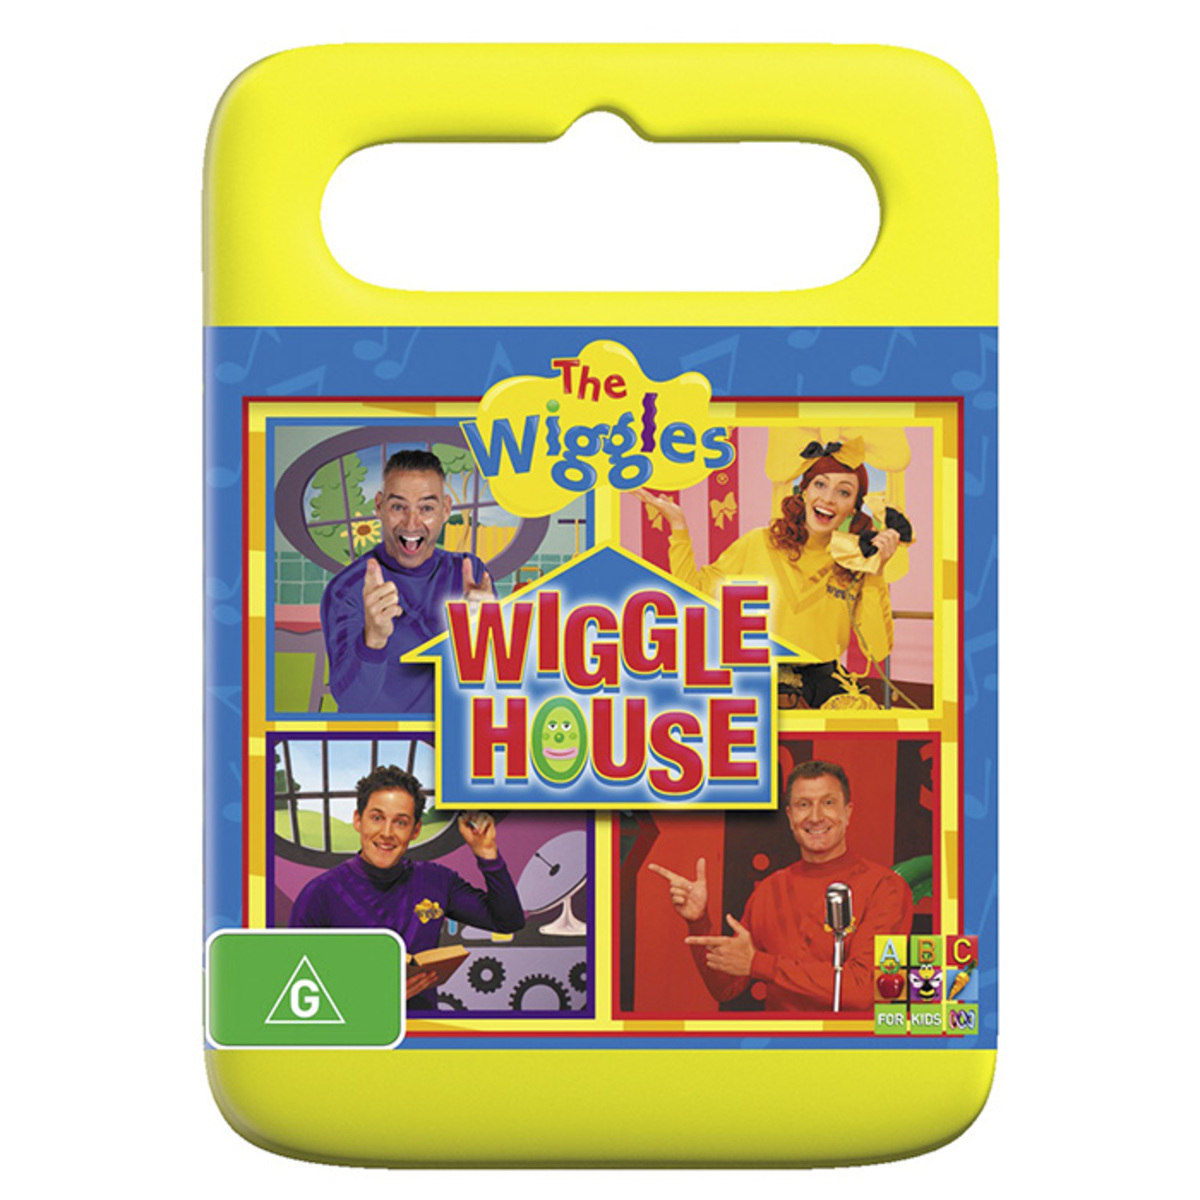 The Wiggles: Wiggle House - DVD